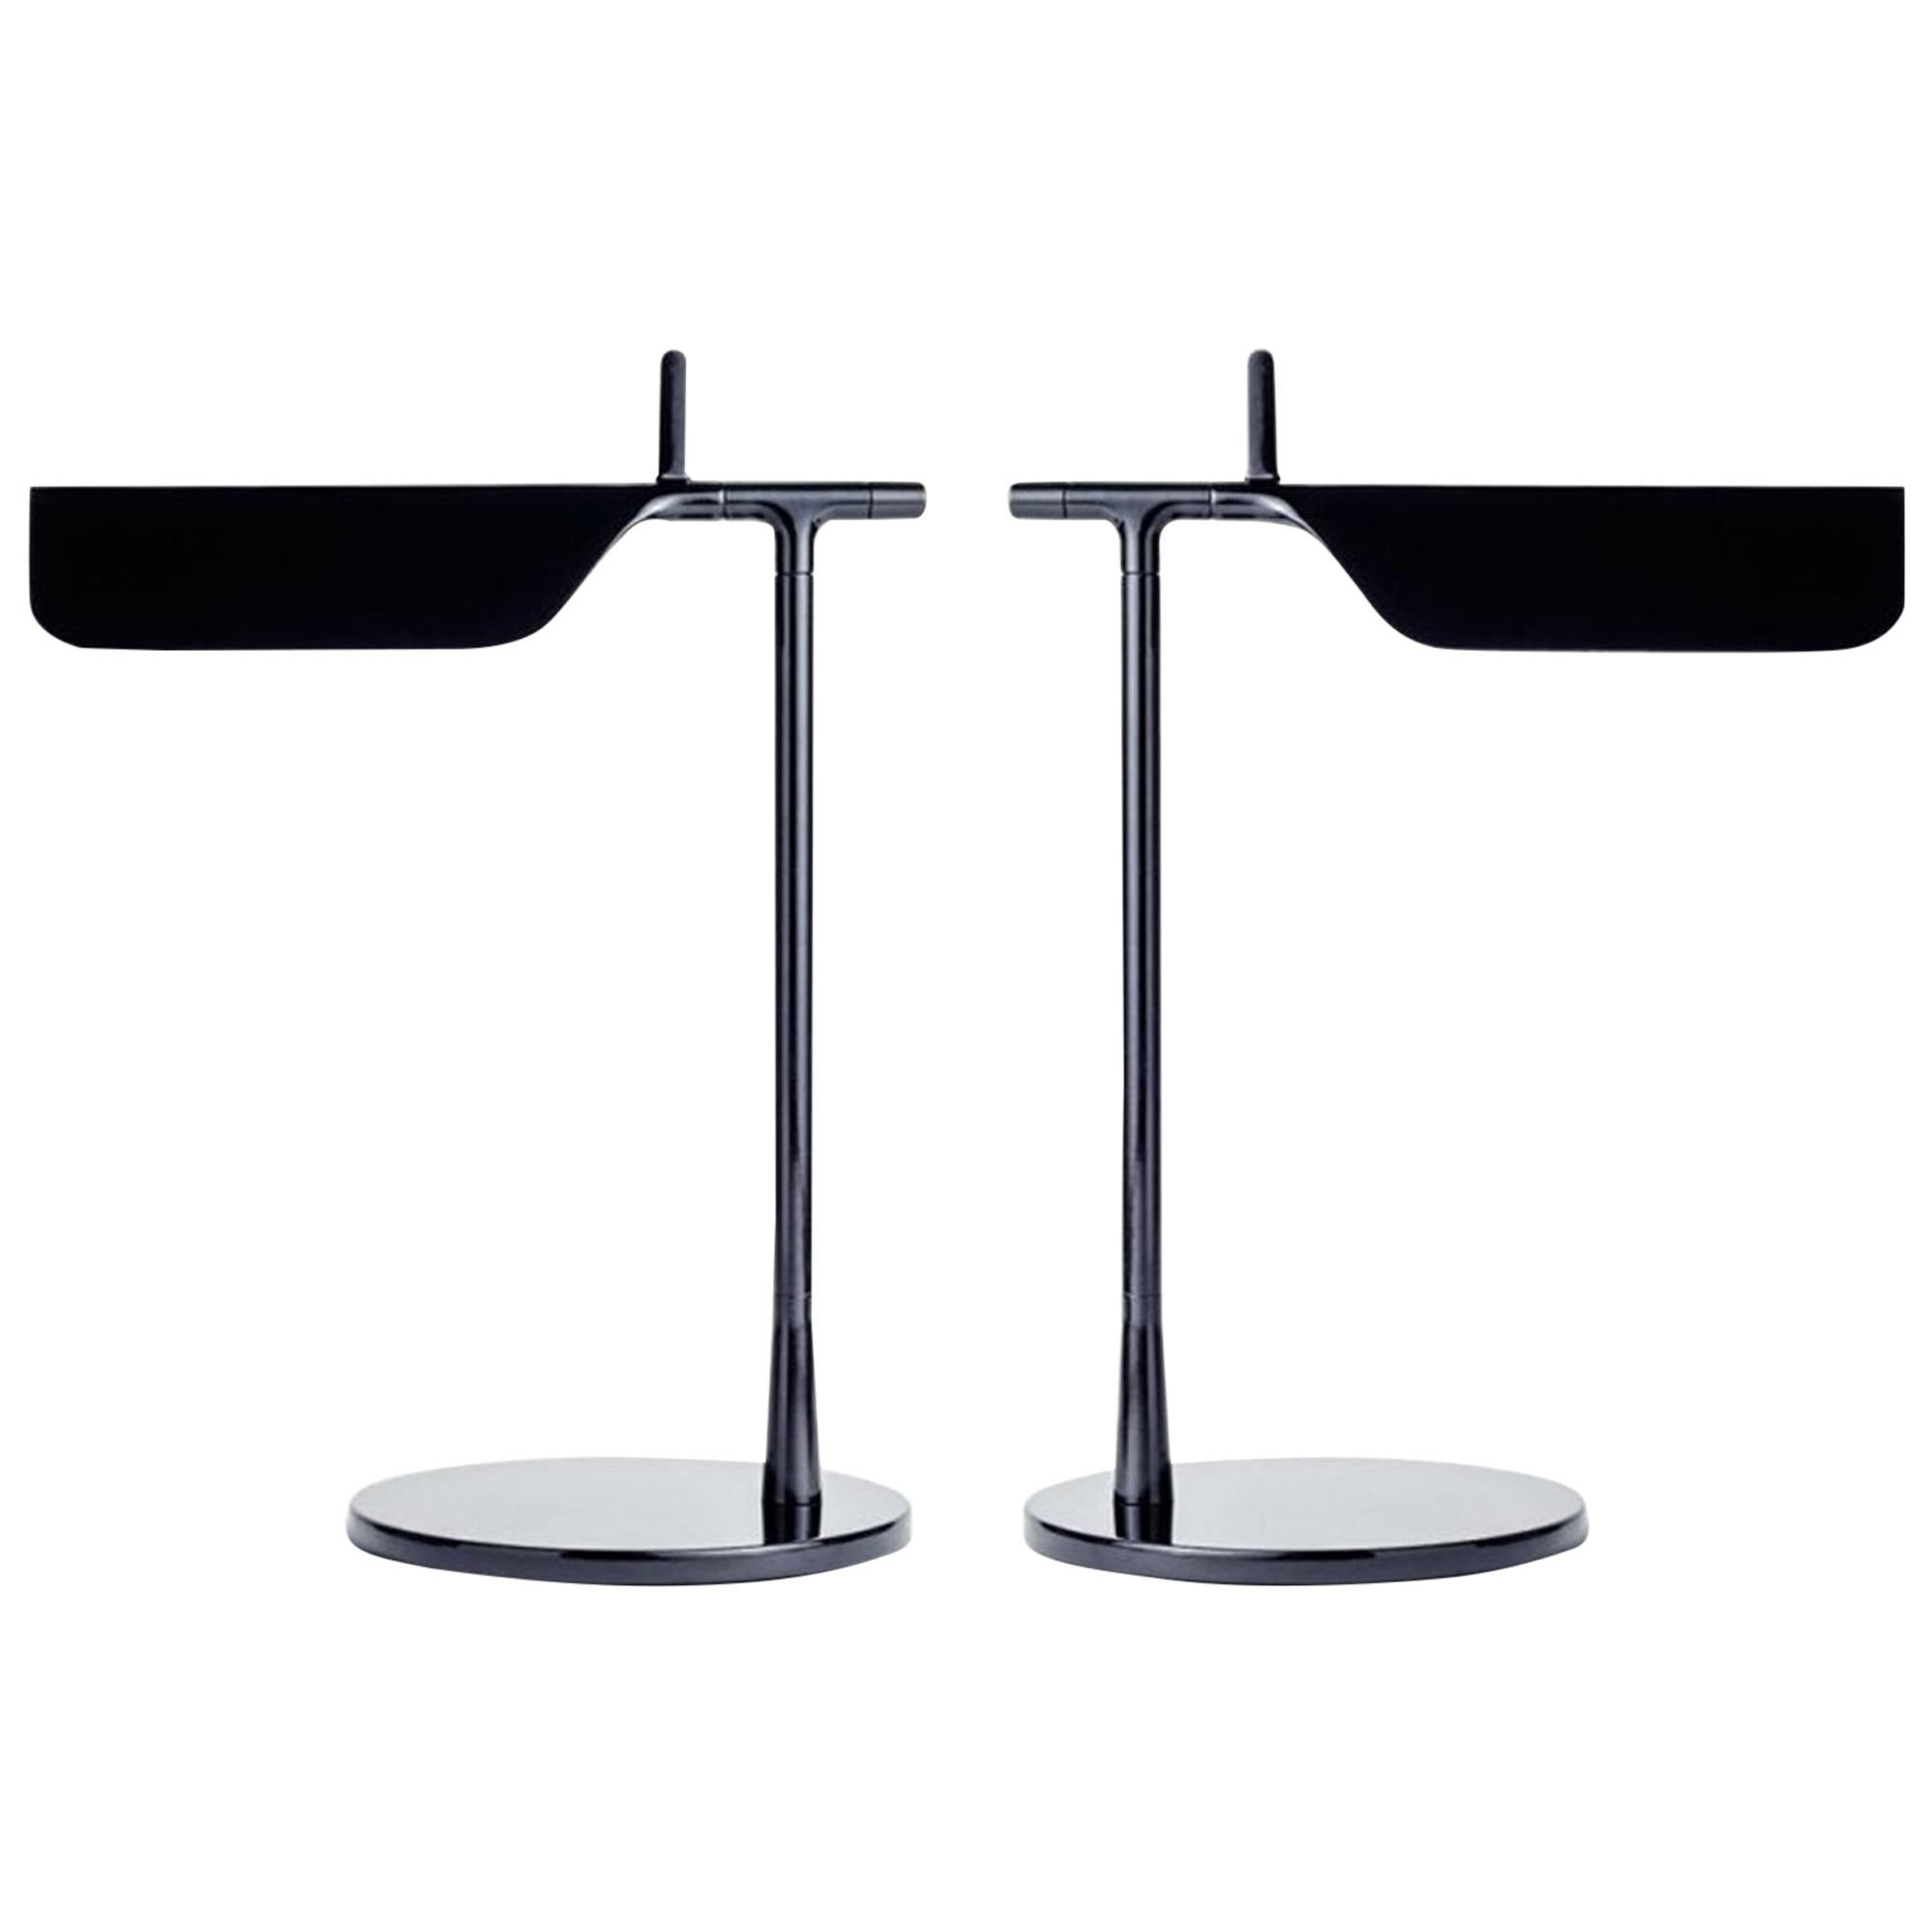 2 Table Lamps by Edward Barber, Jay Osgerby for Flos